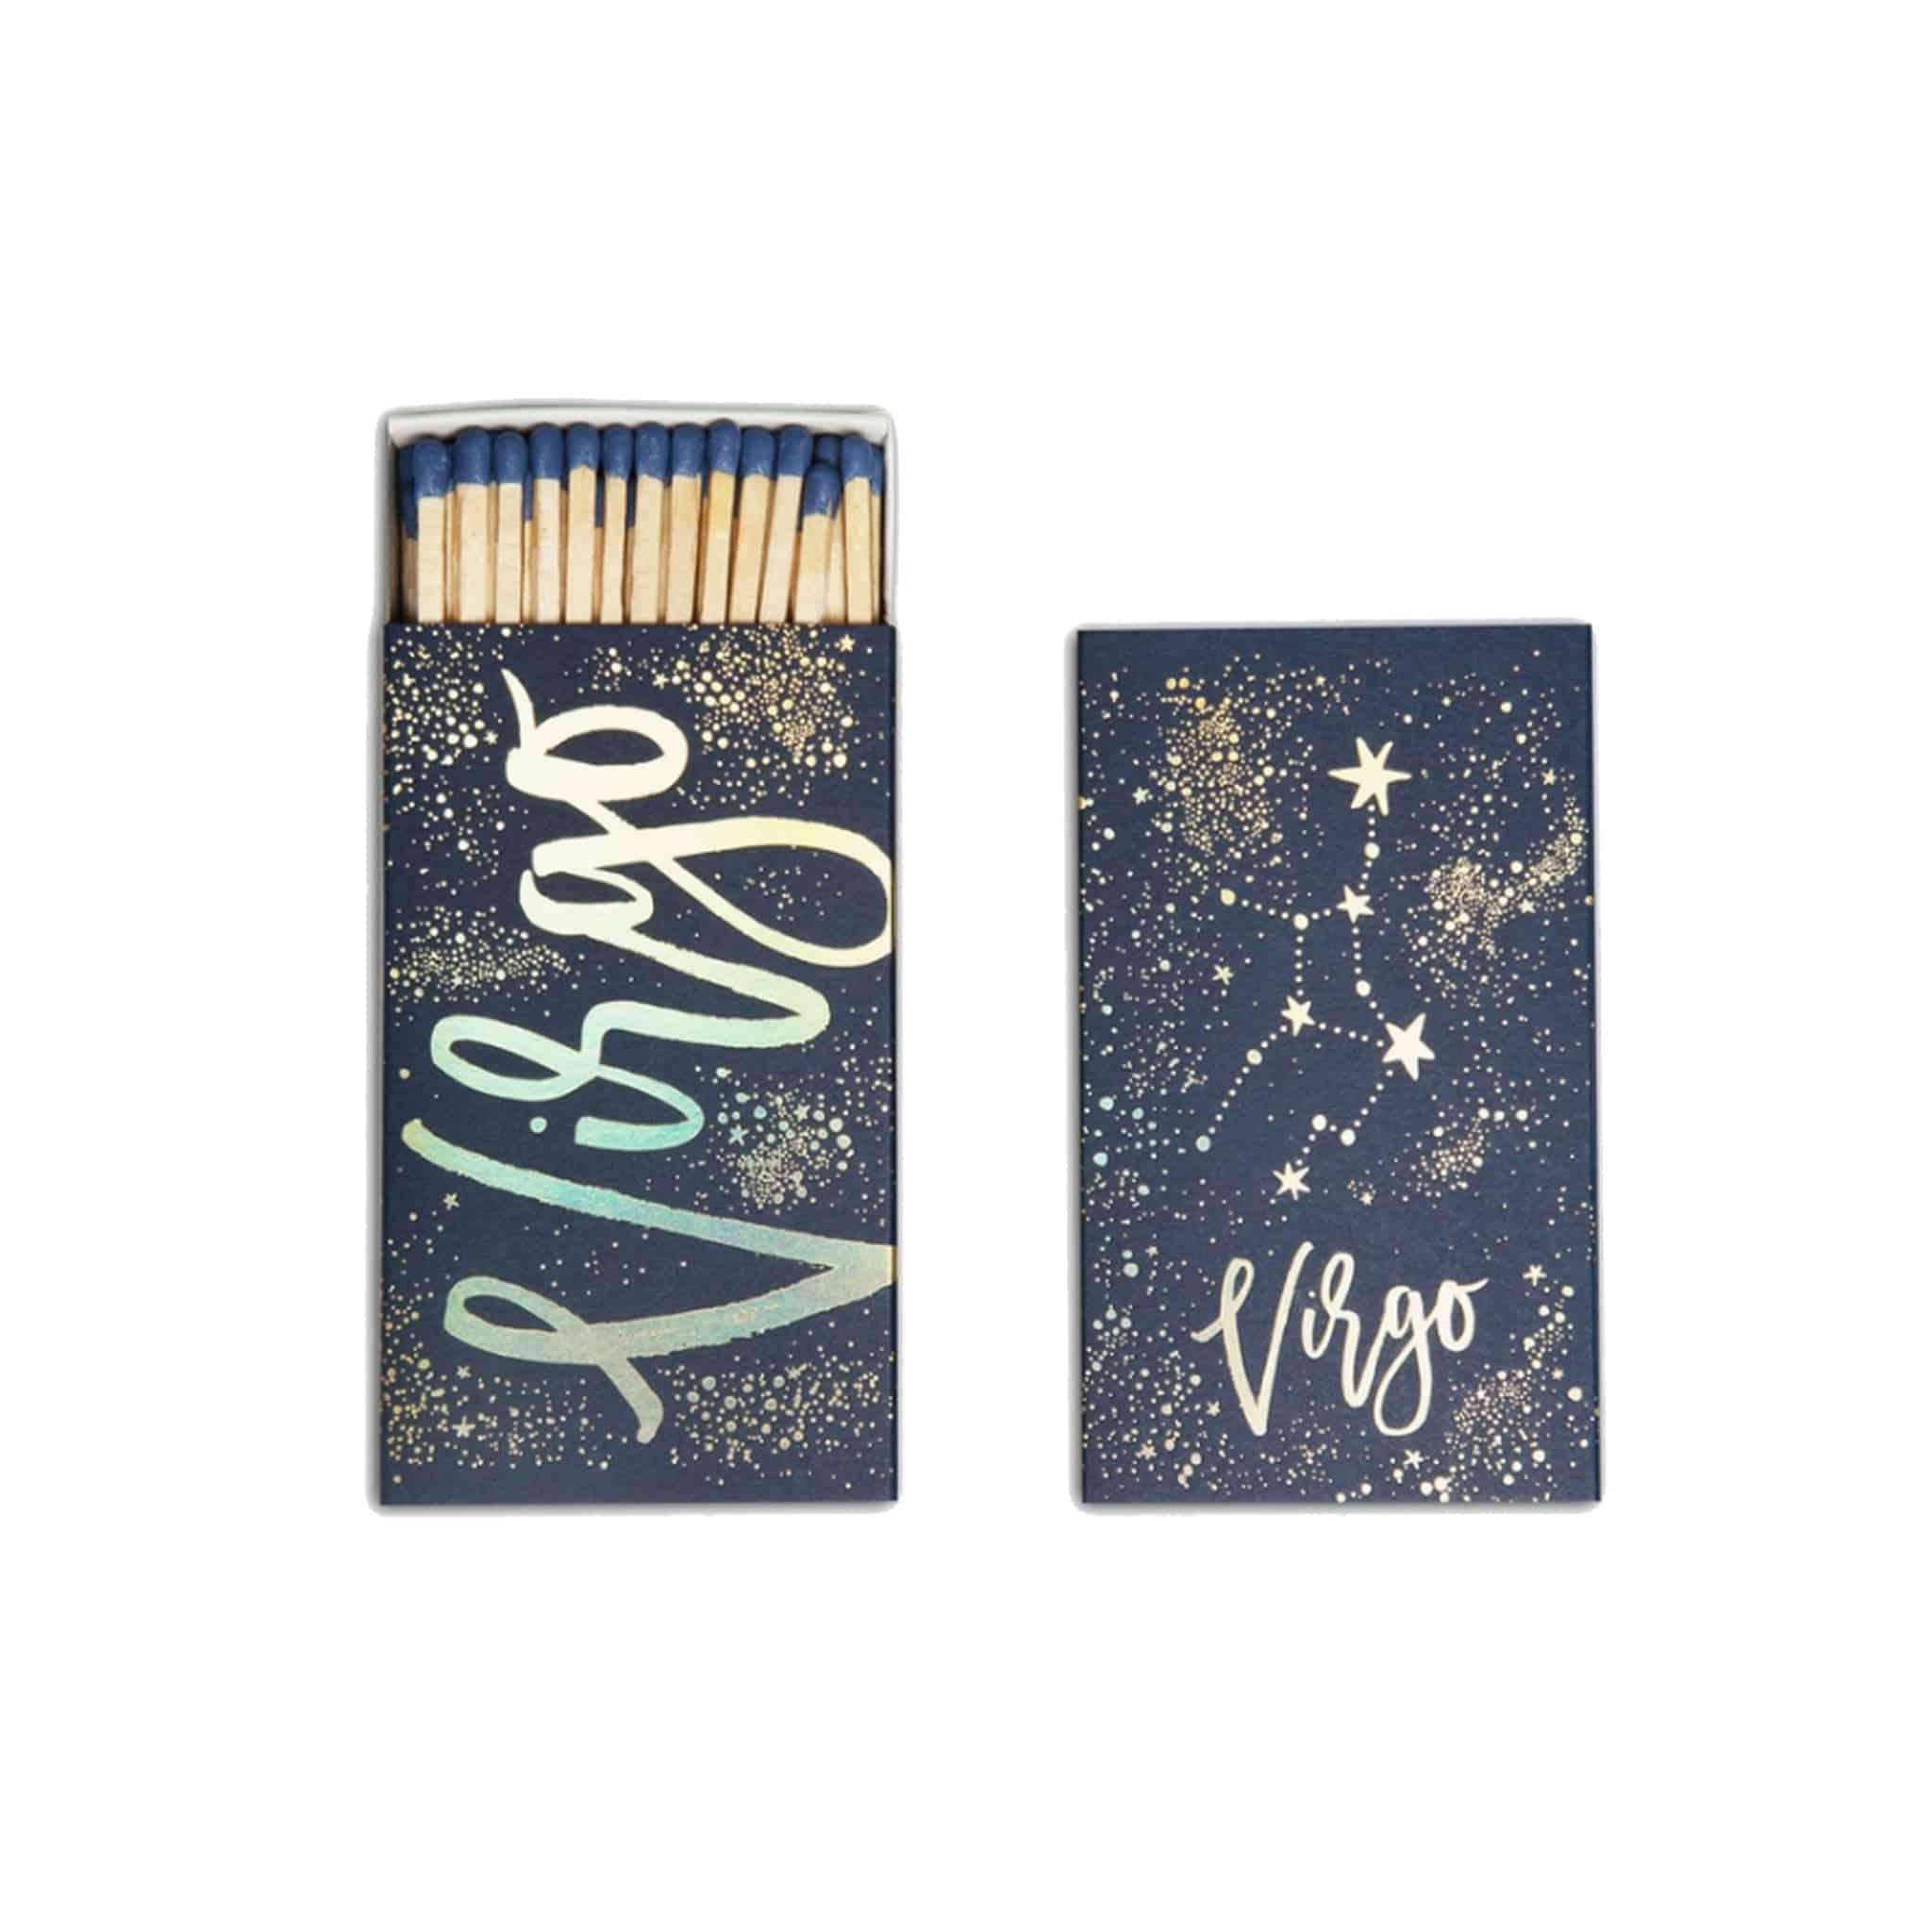 Virgo Zodiac Matchbook - Extra Large 4.5" Cigar Matches - The Gilded Witch